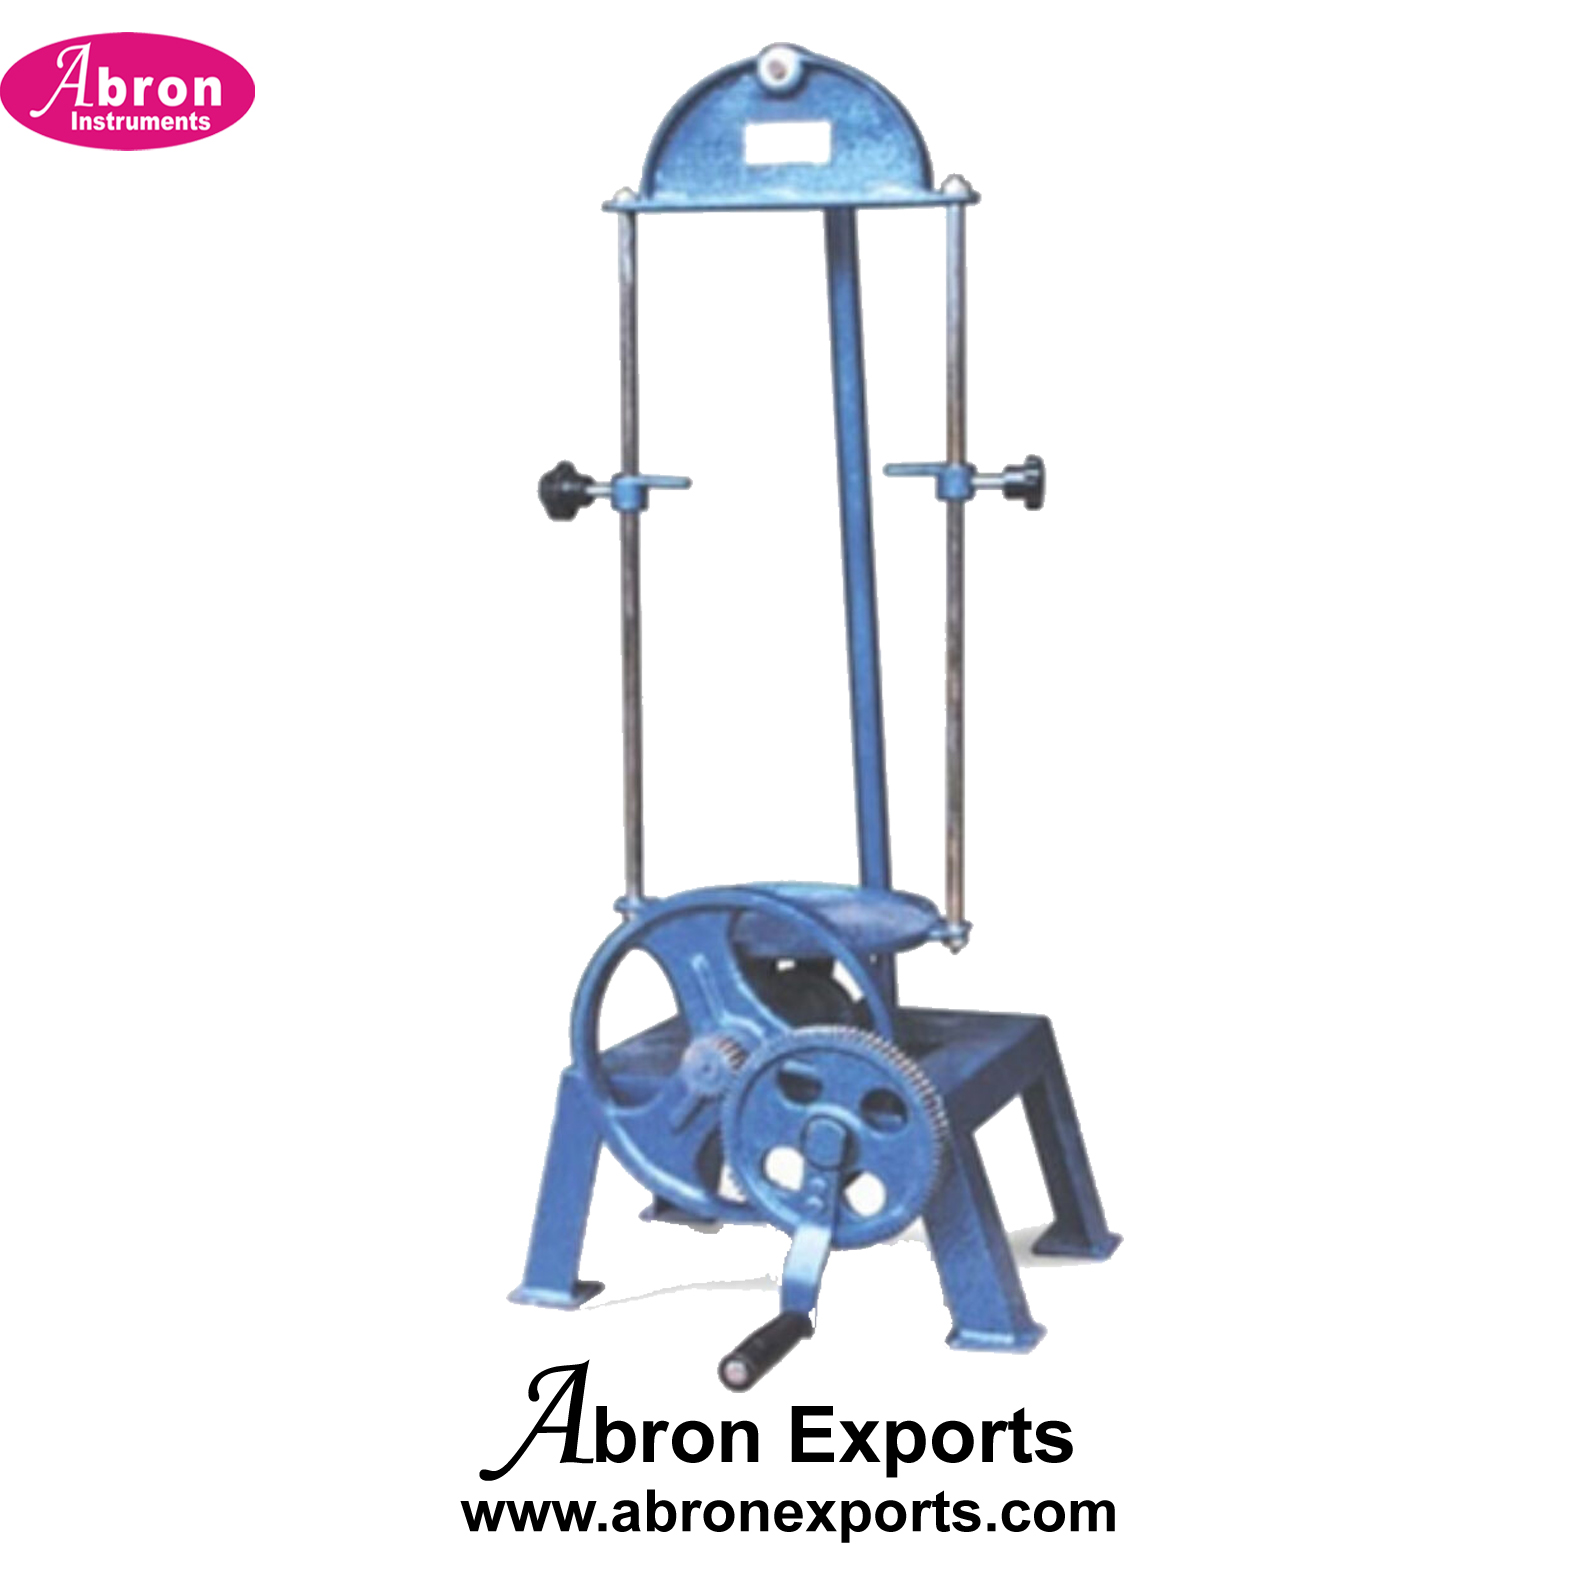 Sieve Shaker Manual Hand Operated for 20cm Dia 8 inch 7 Sieves Abron ASI-169A 